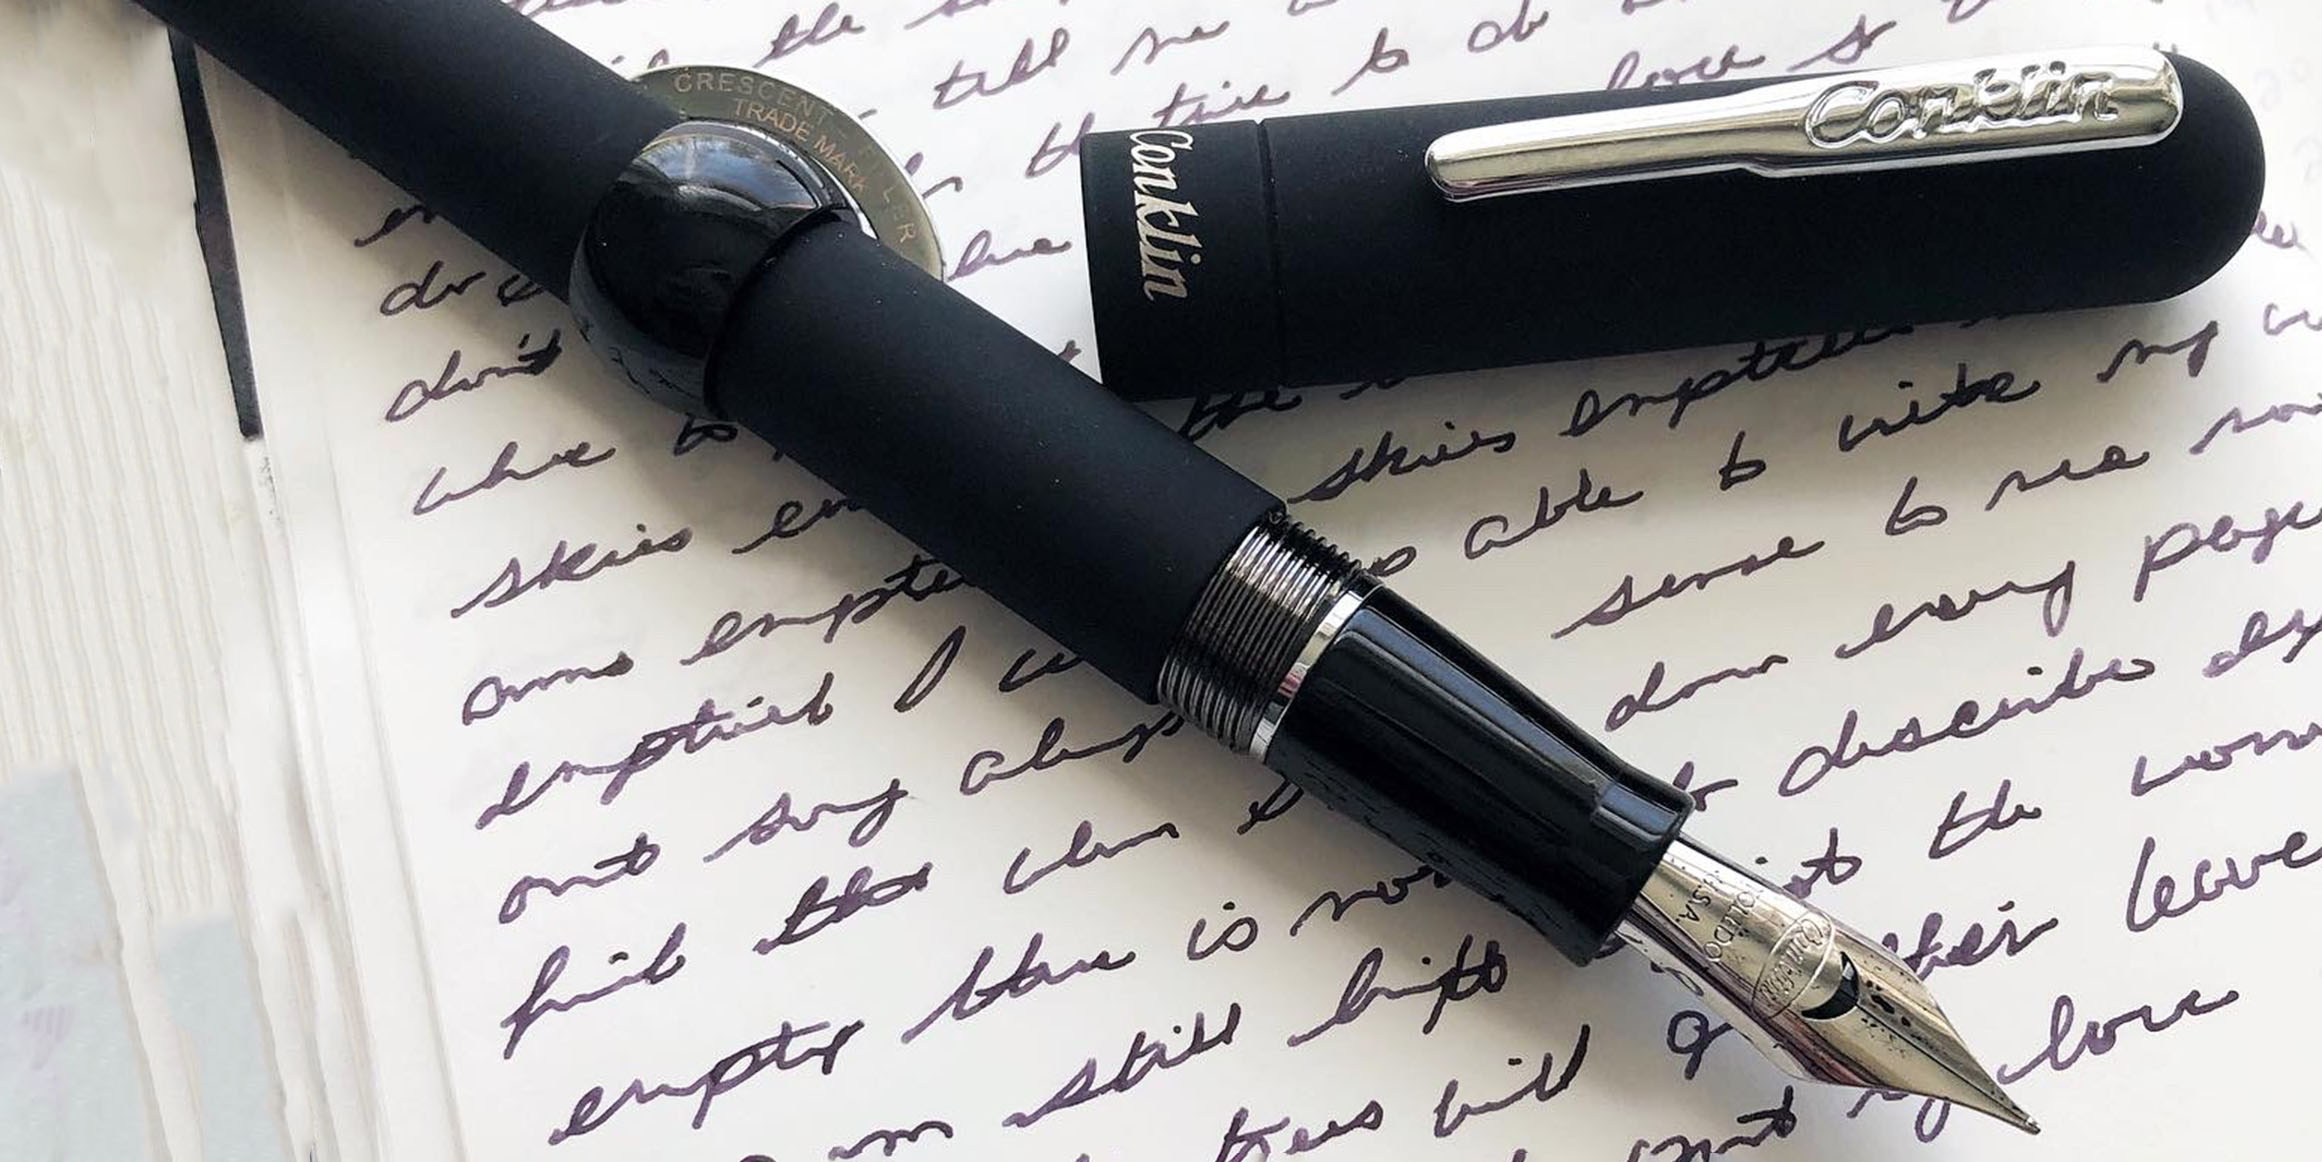 Looking to Buy The Best Parker Fountain Pen: Here